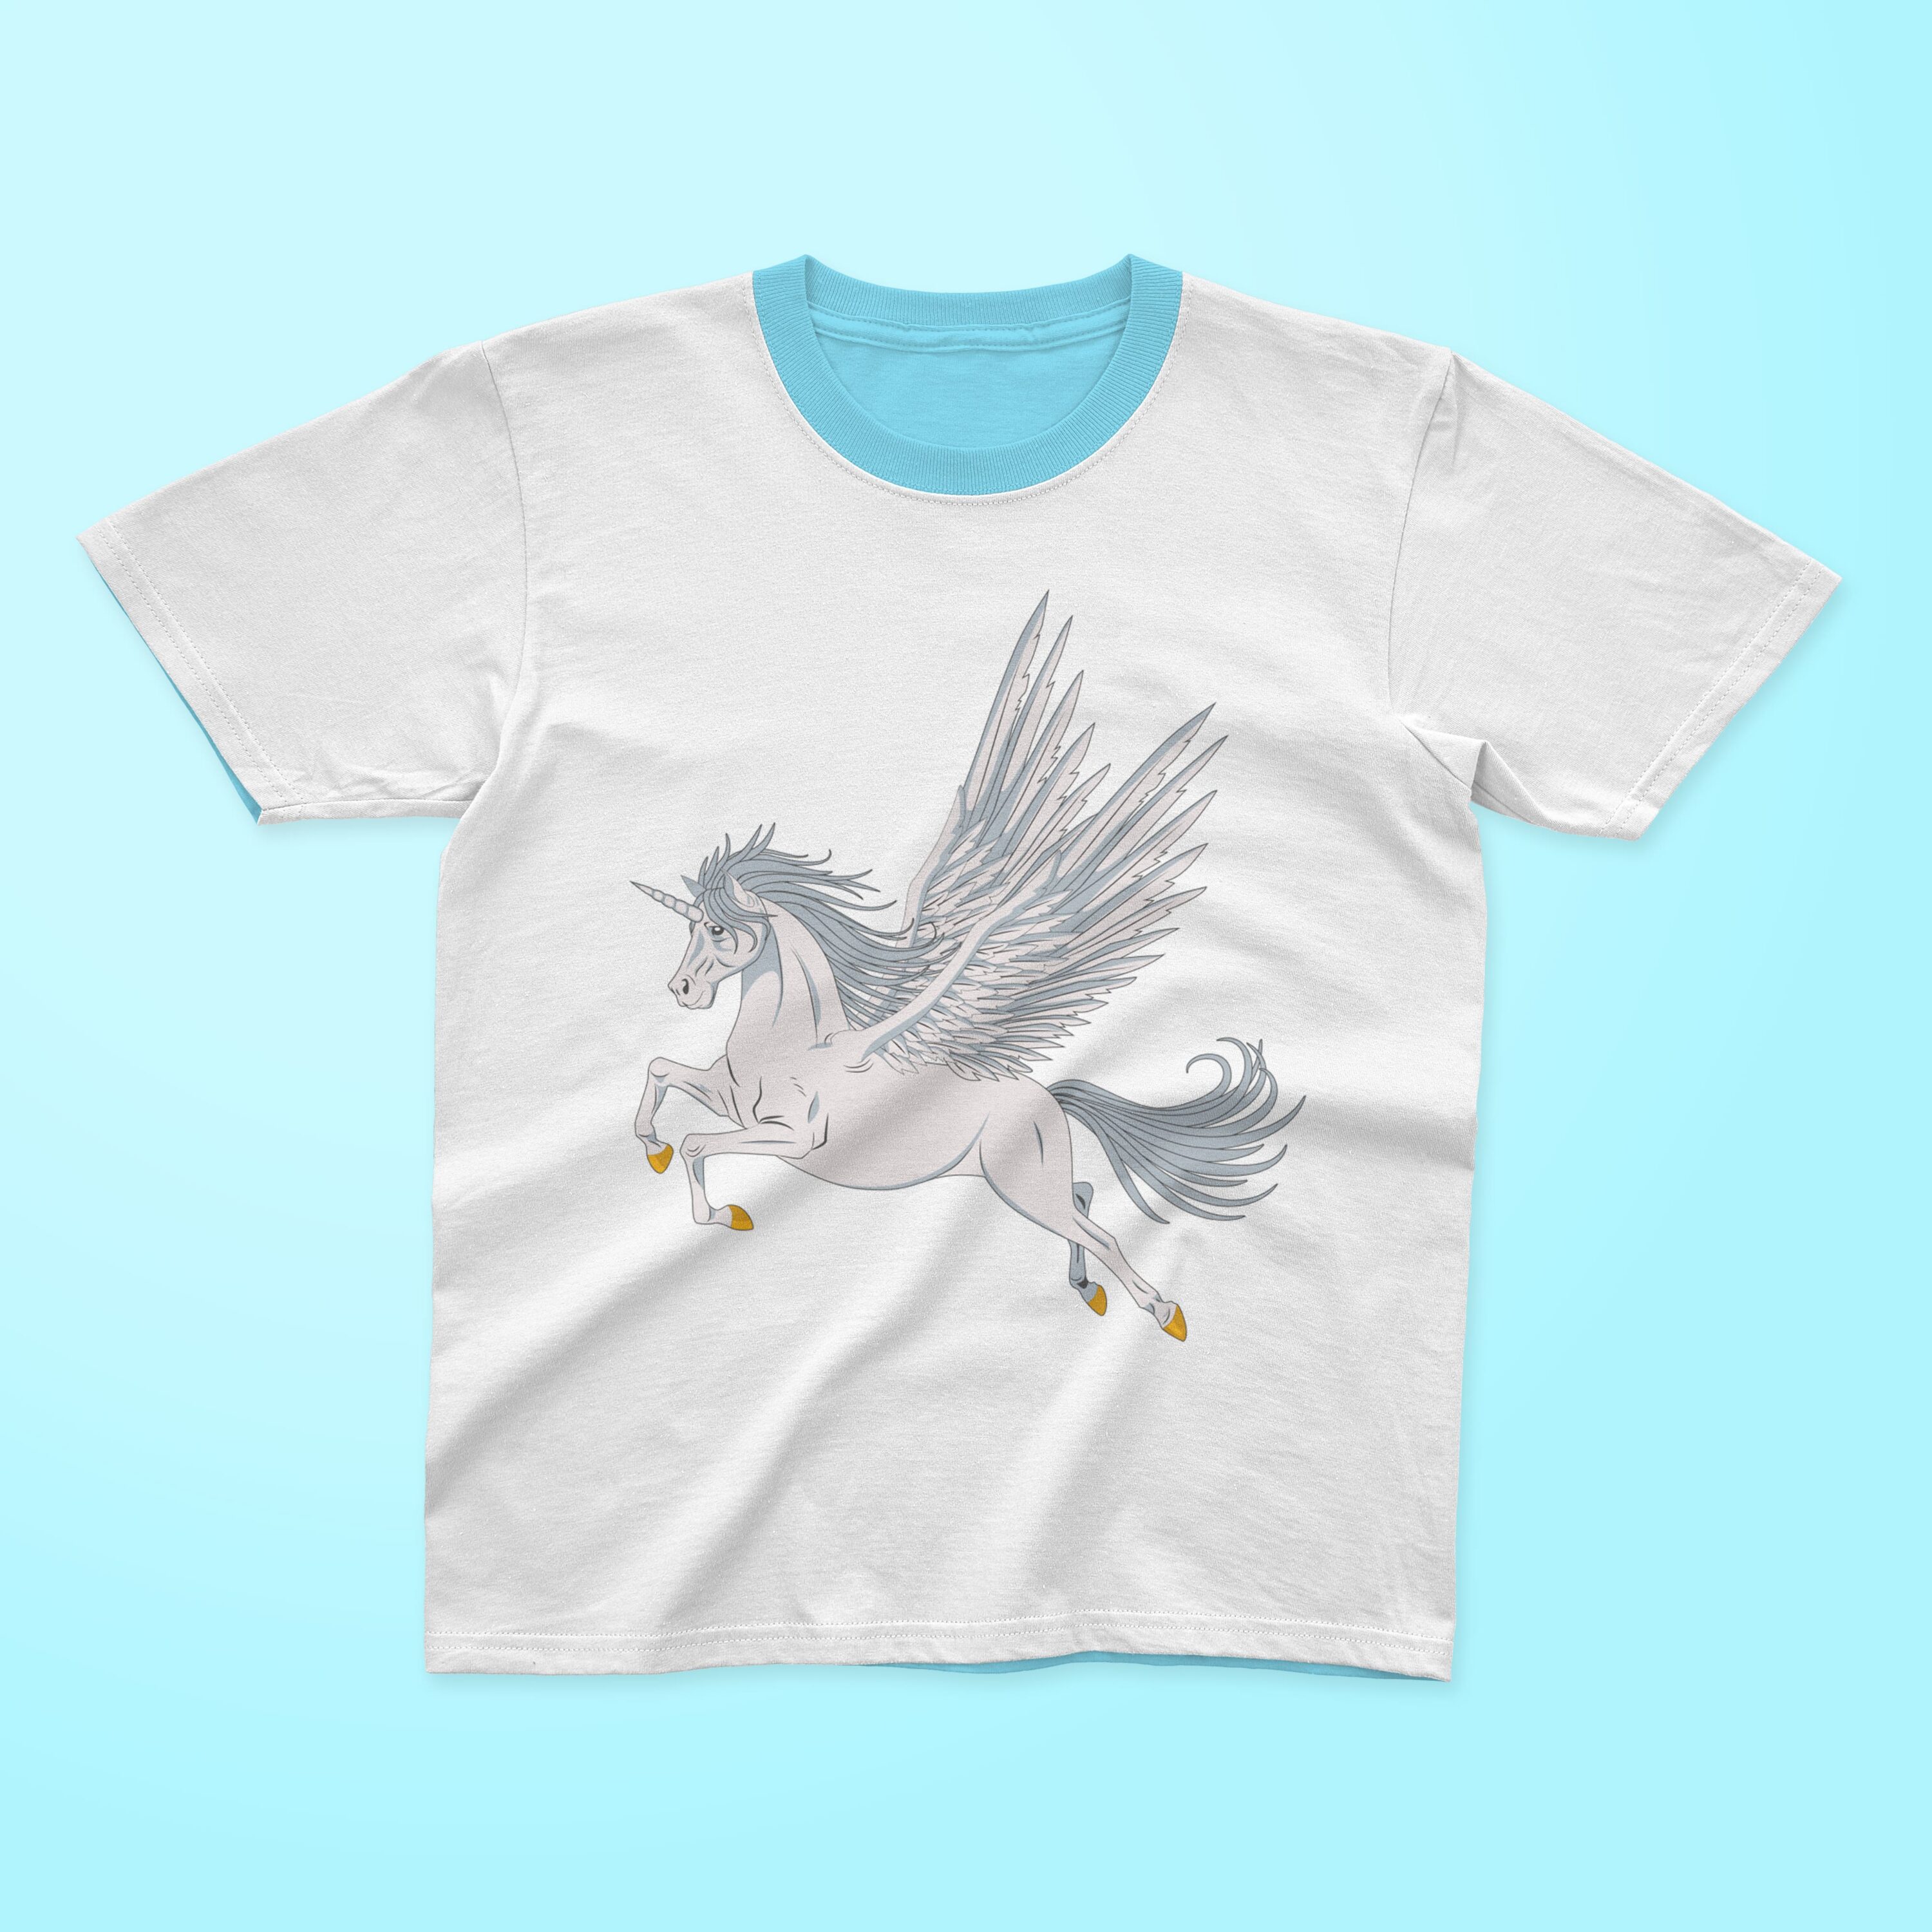 White t-shirt with a blue collar and an image of a flying unicorn on a light blue background.